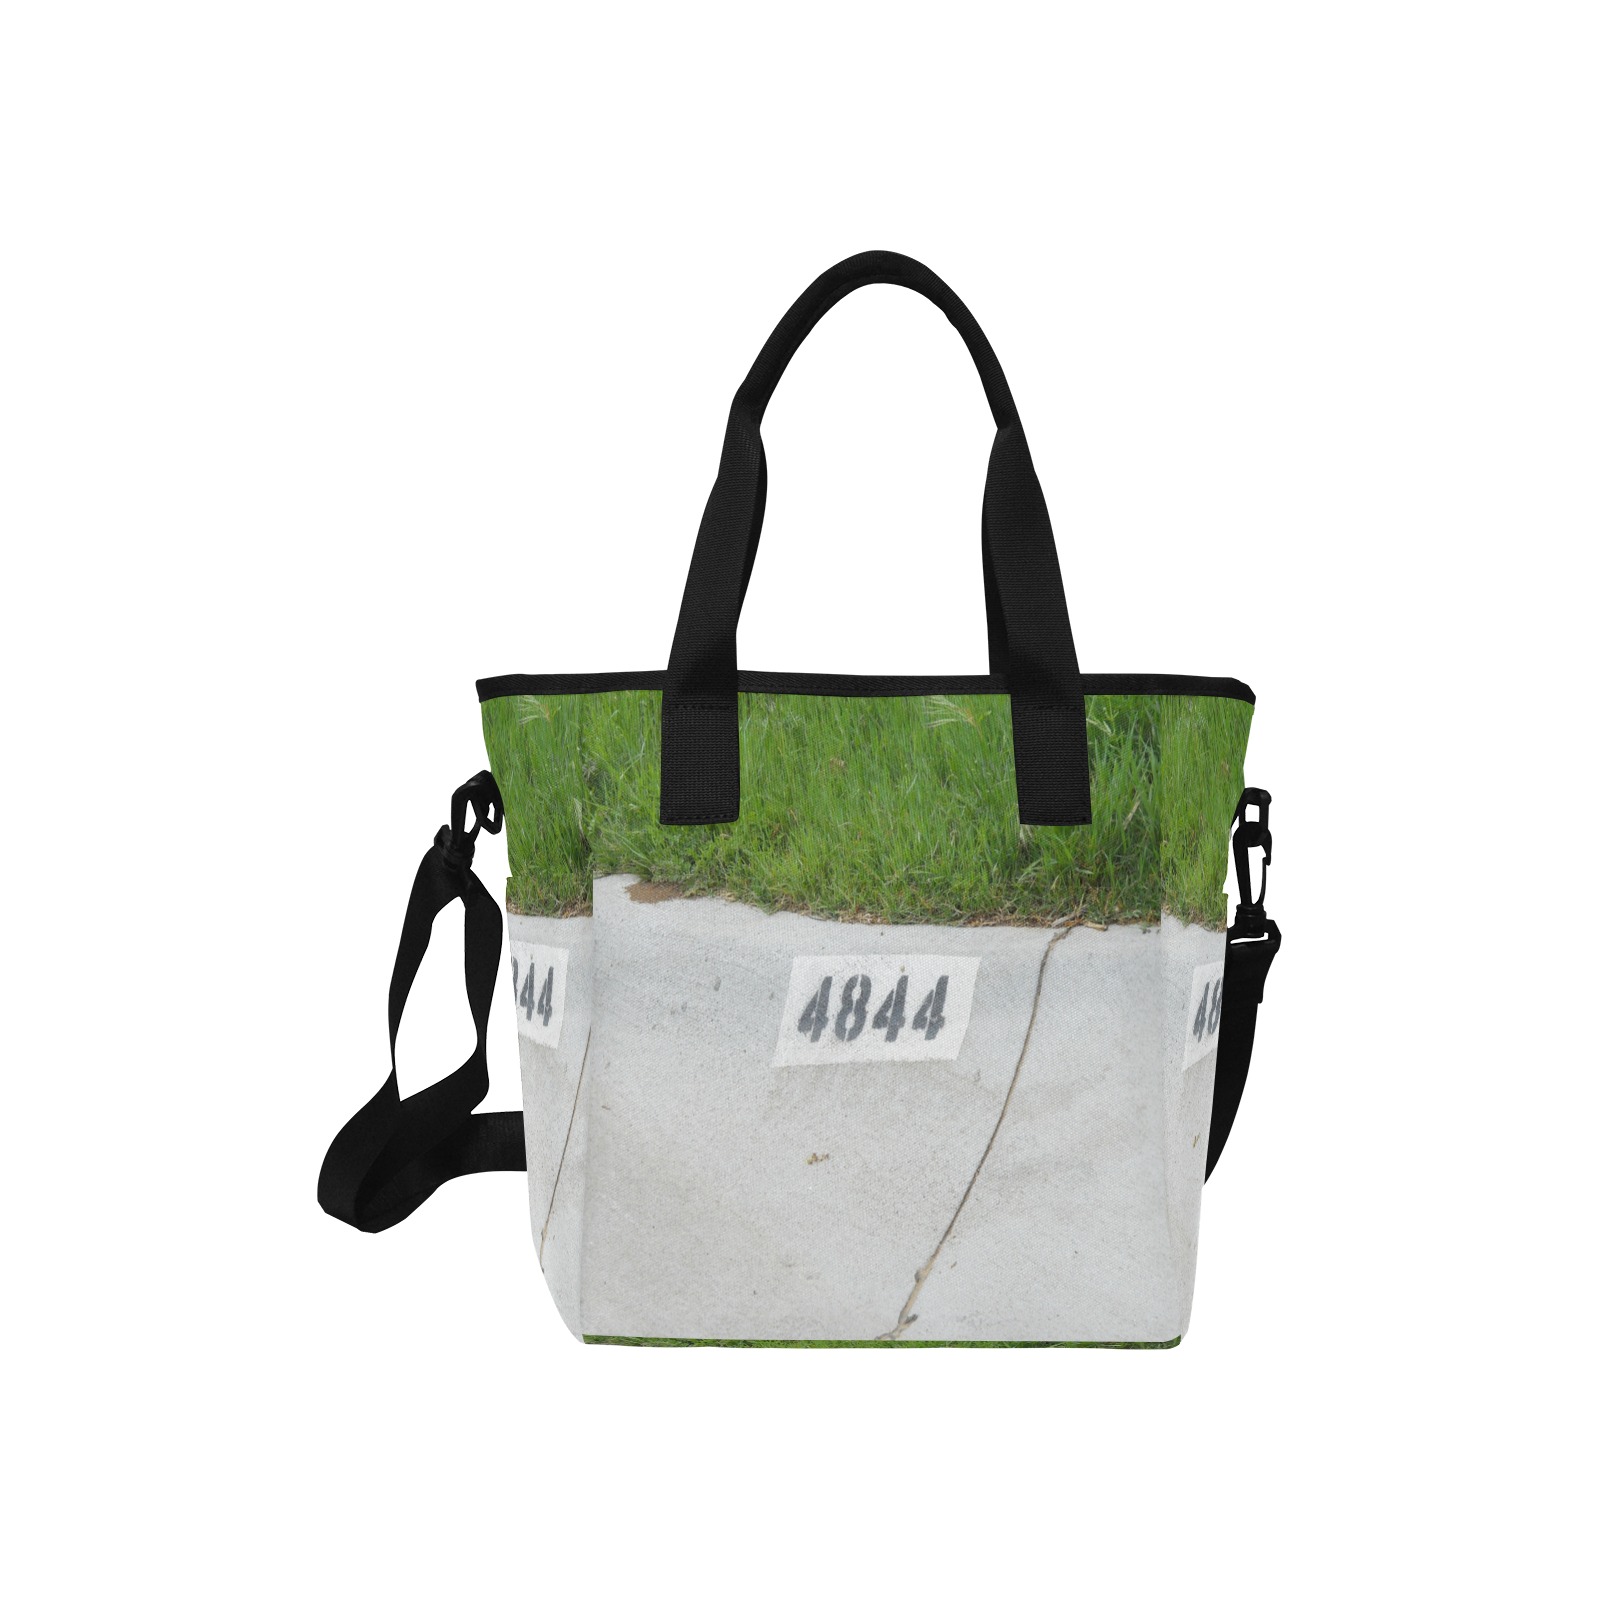 Street Number 4844 Insulated Tote Bag with Shoulder Strap (Model 1724)